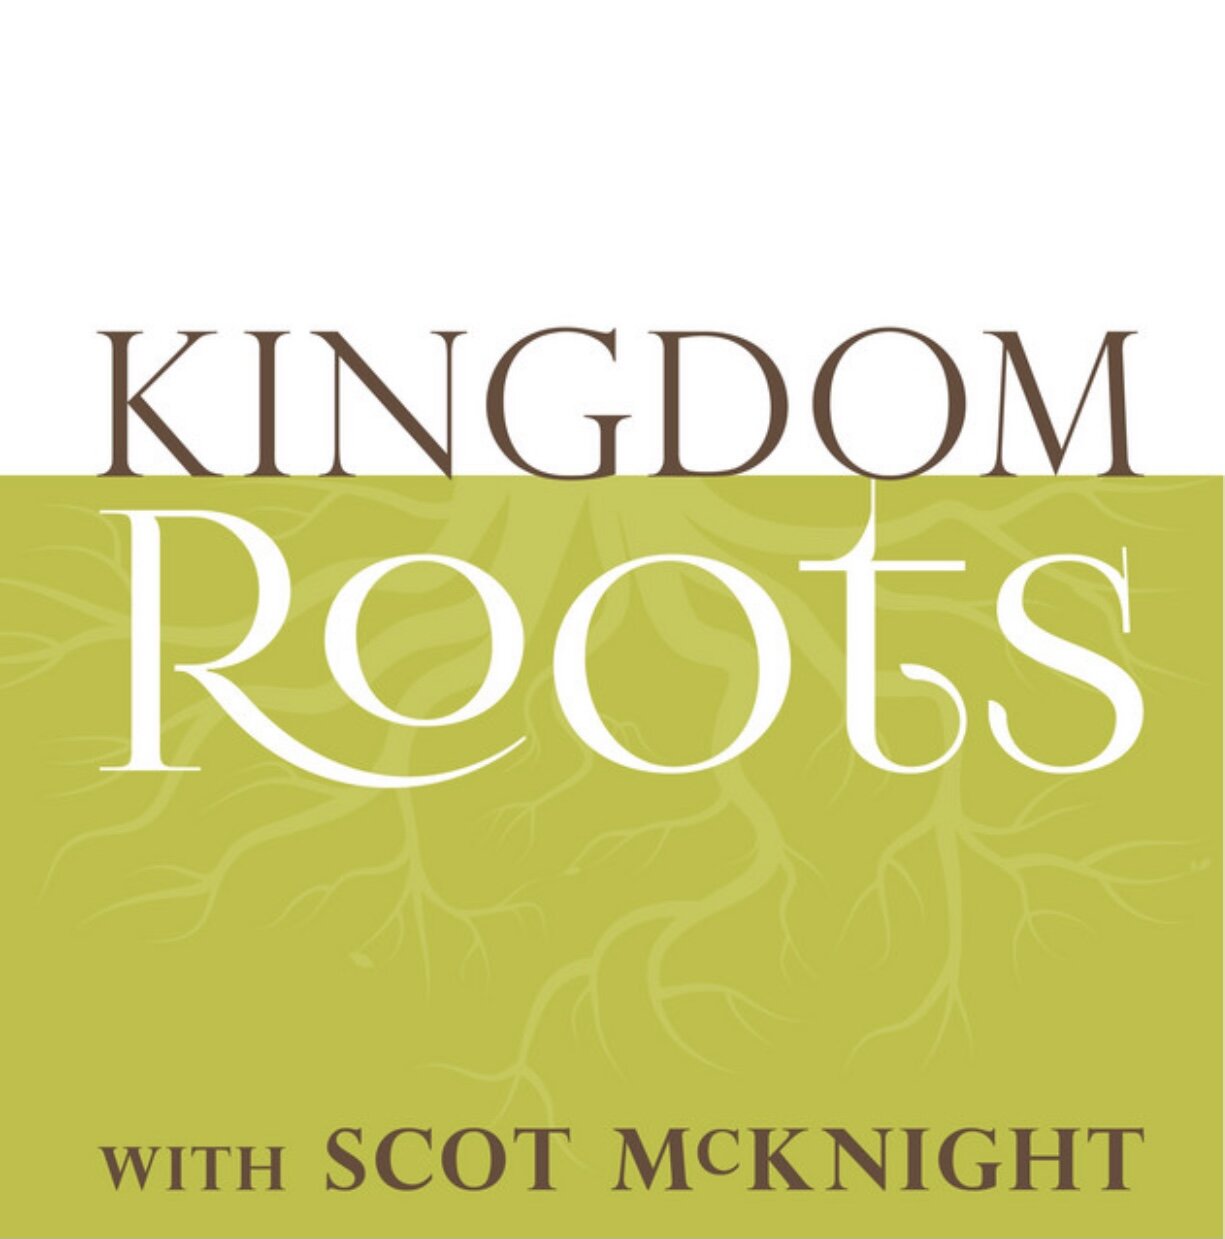 Ep. 23: Race and the Kingdom with Dr. Derwin L. Gray